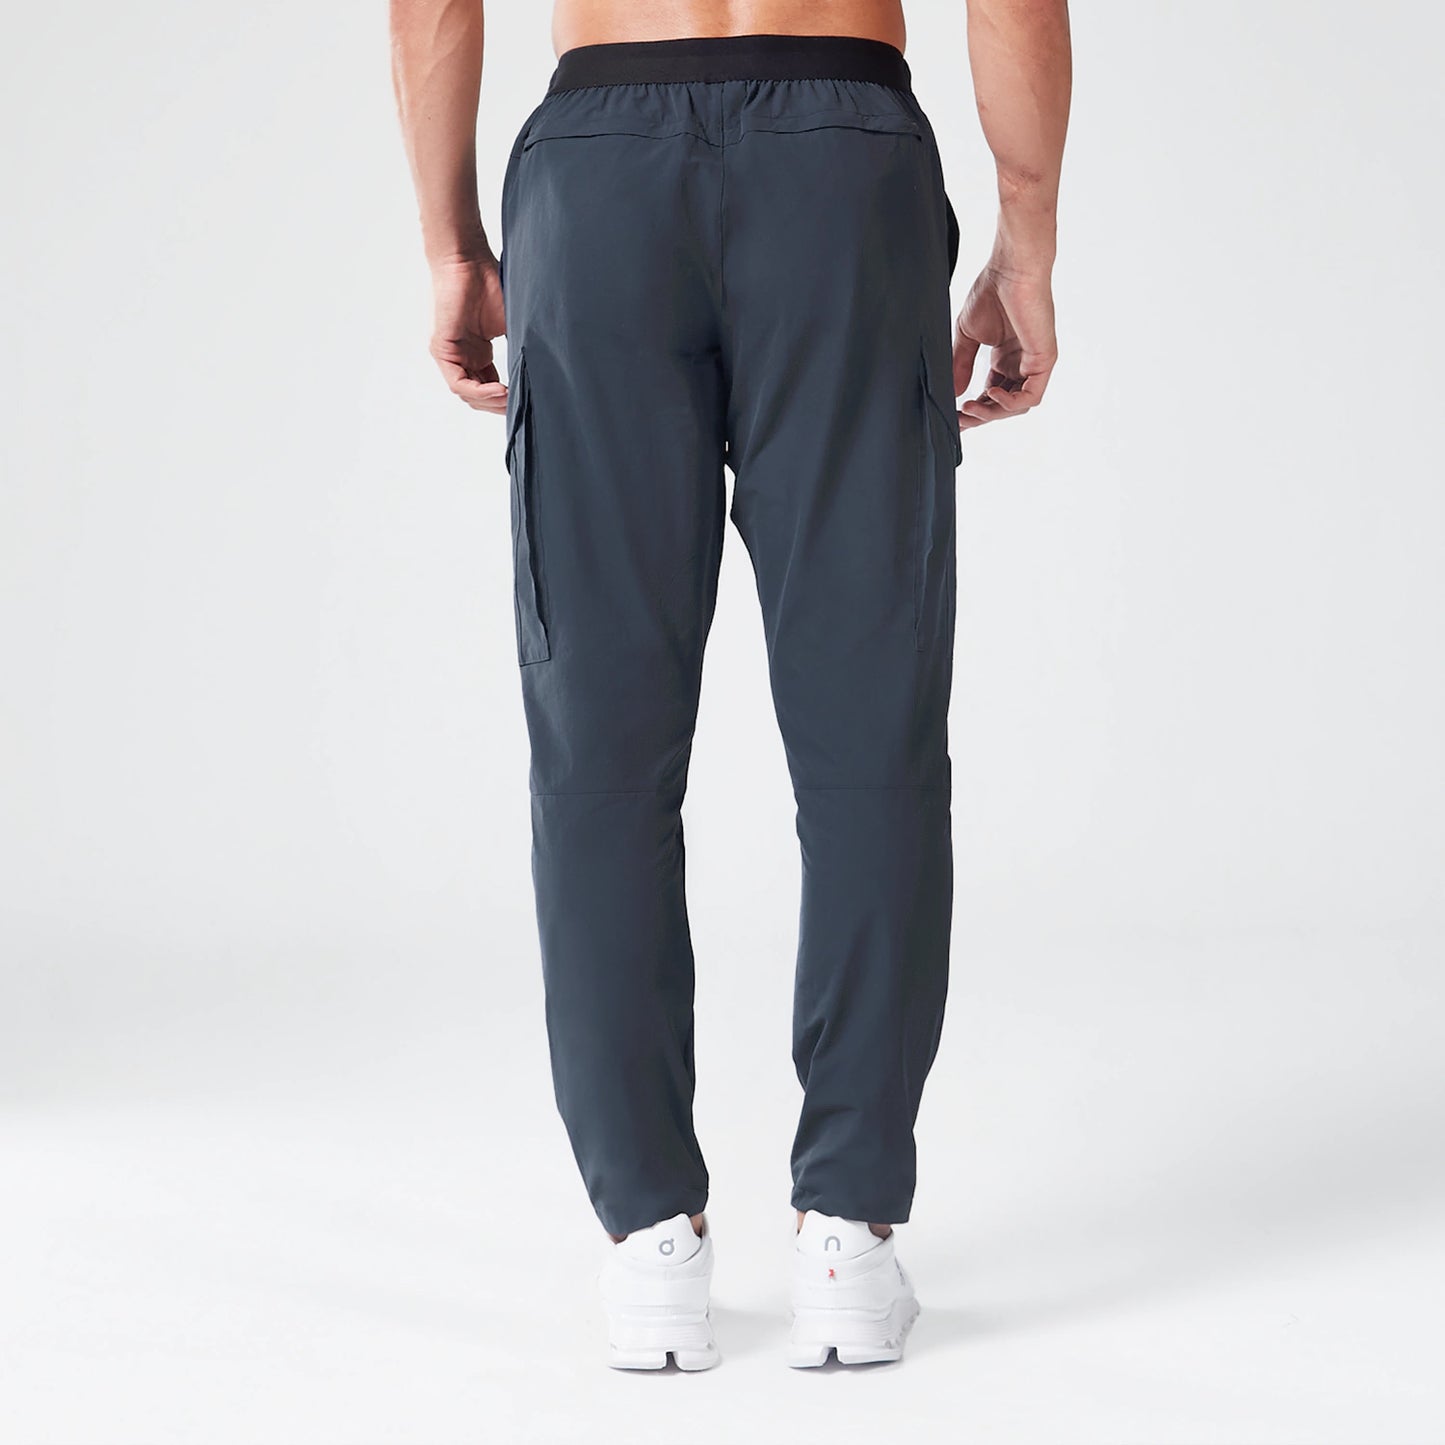 AE | Code Tapered Cargo Pants - Blue Nights | SQUATWOLF